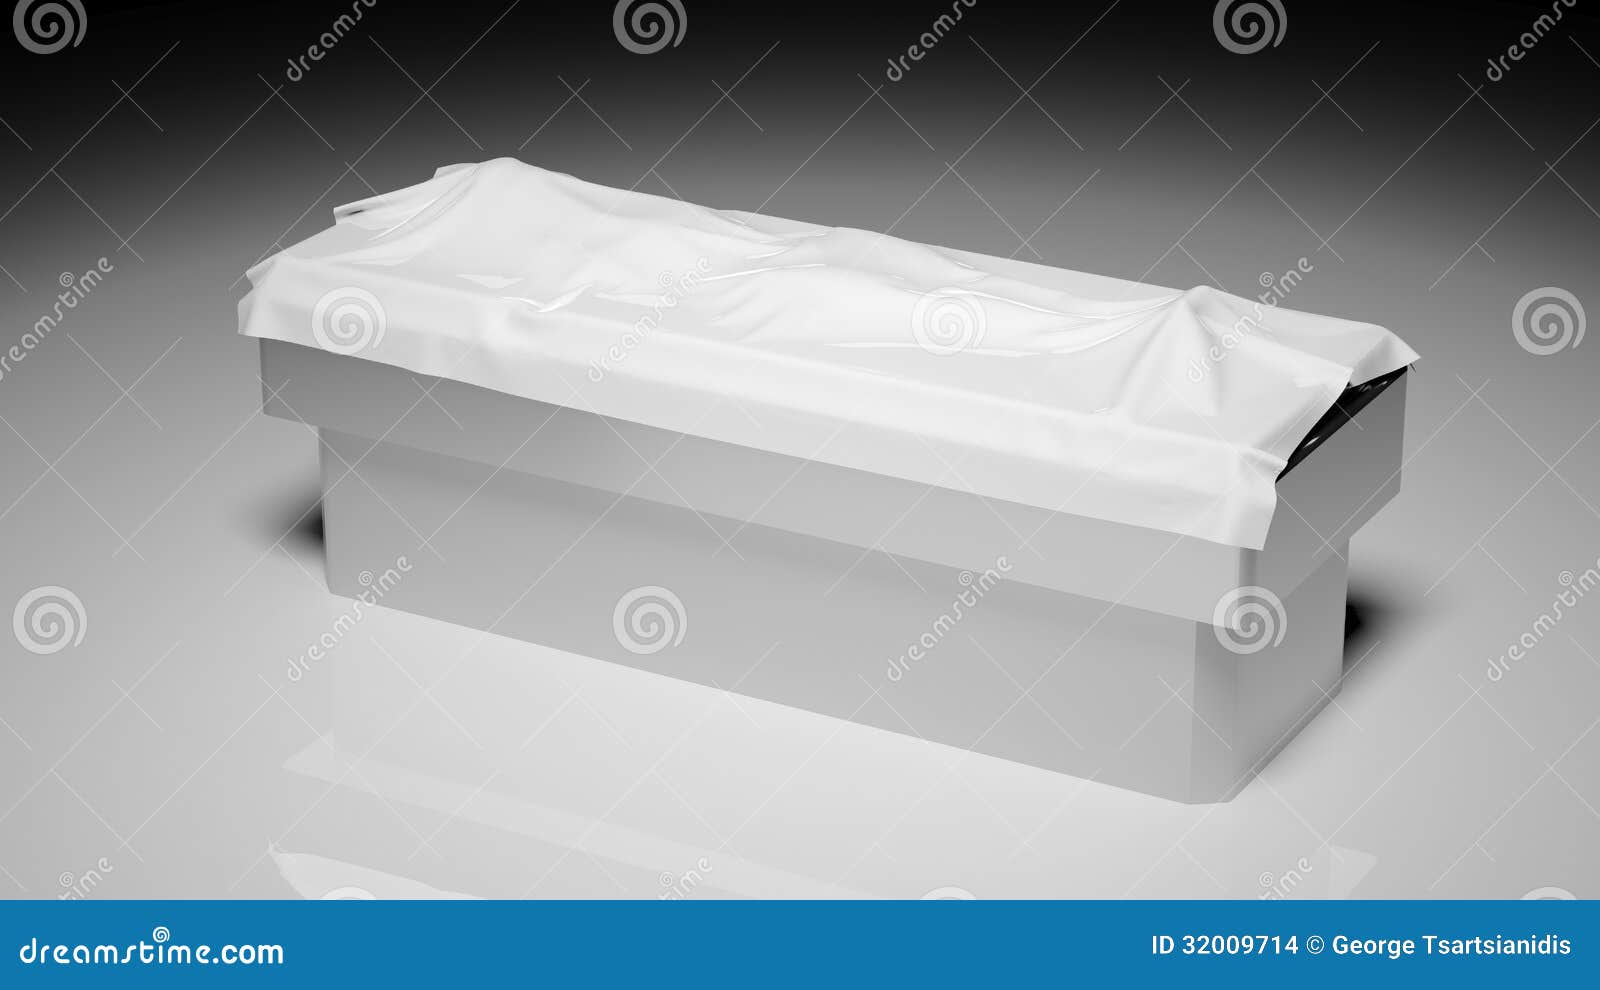 corpse on autopsy table